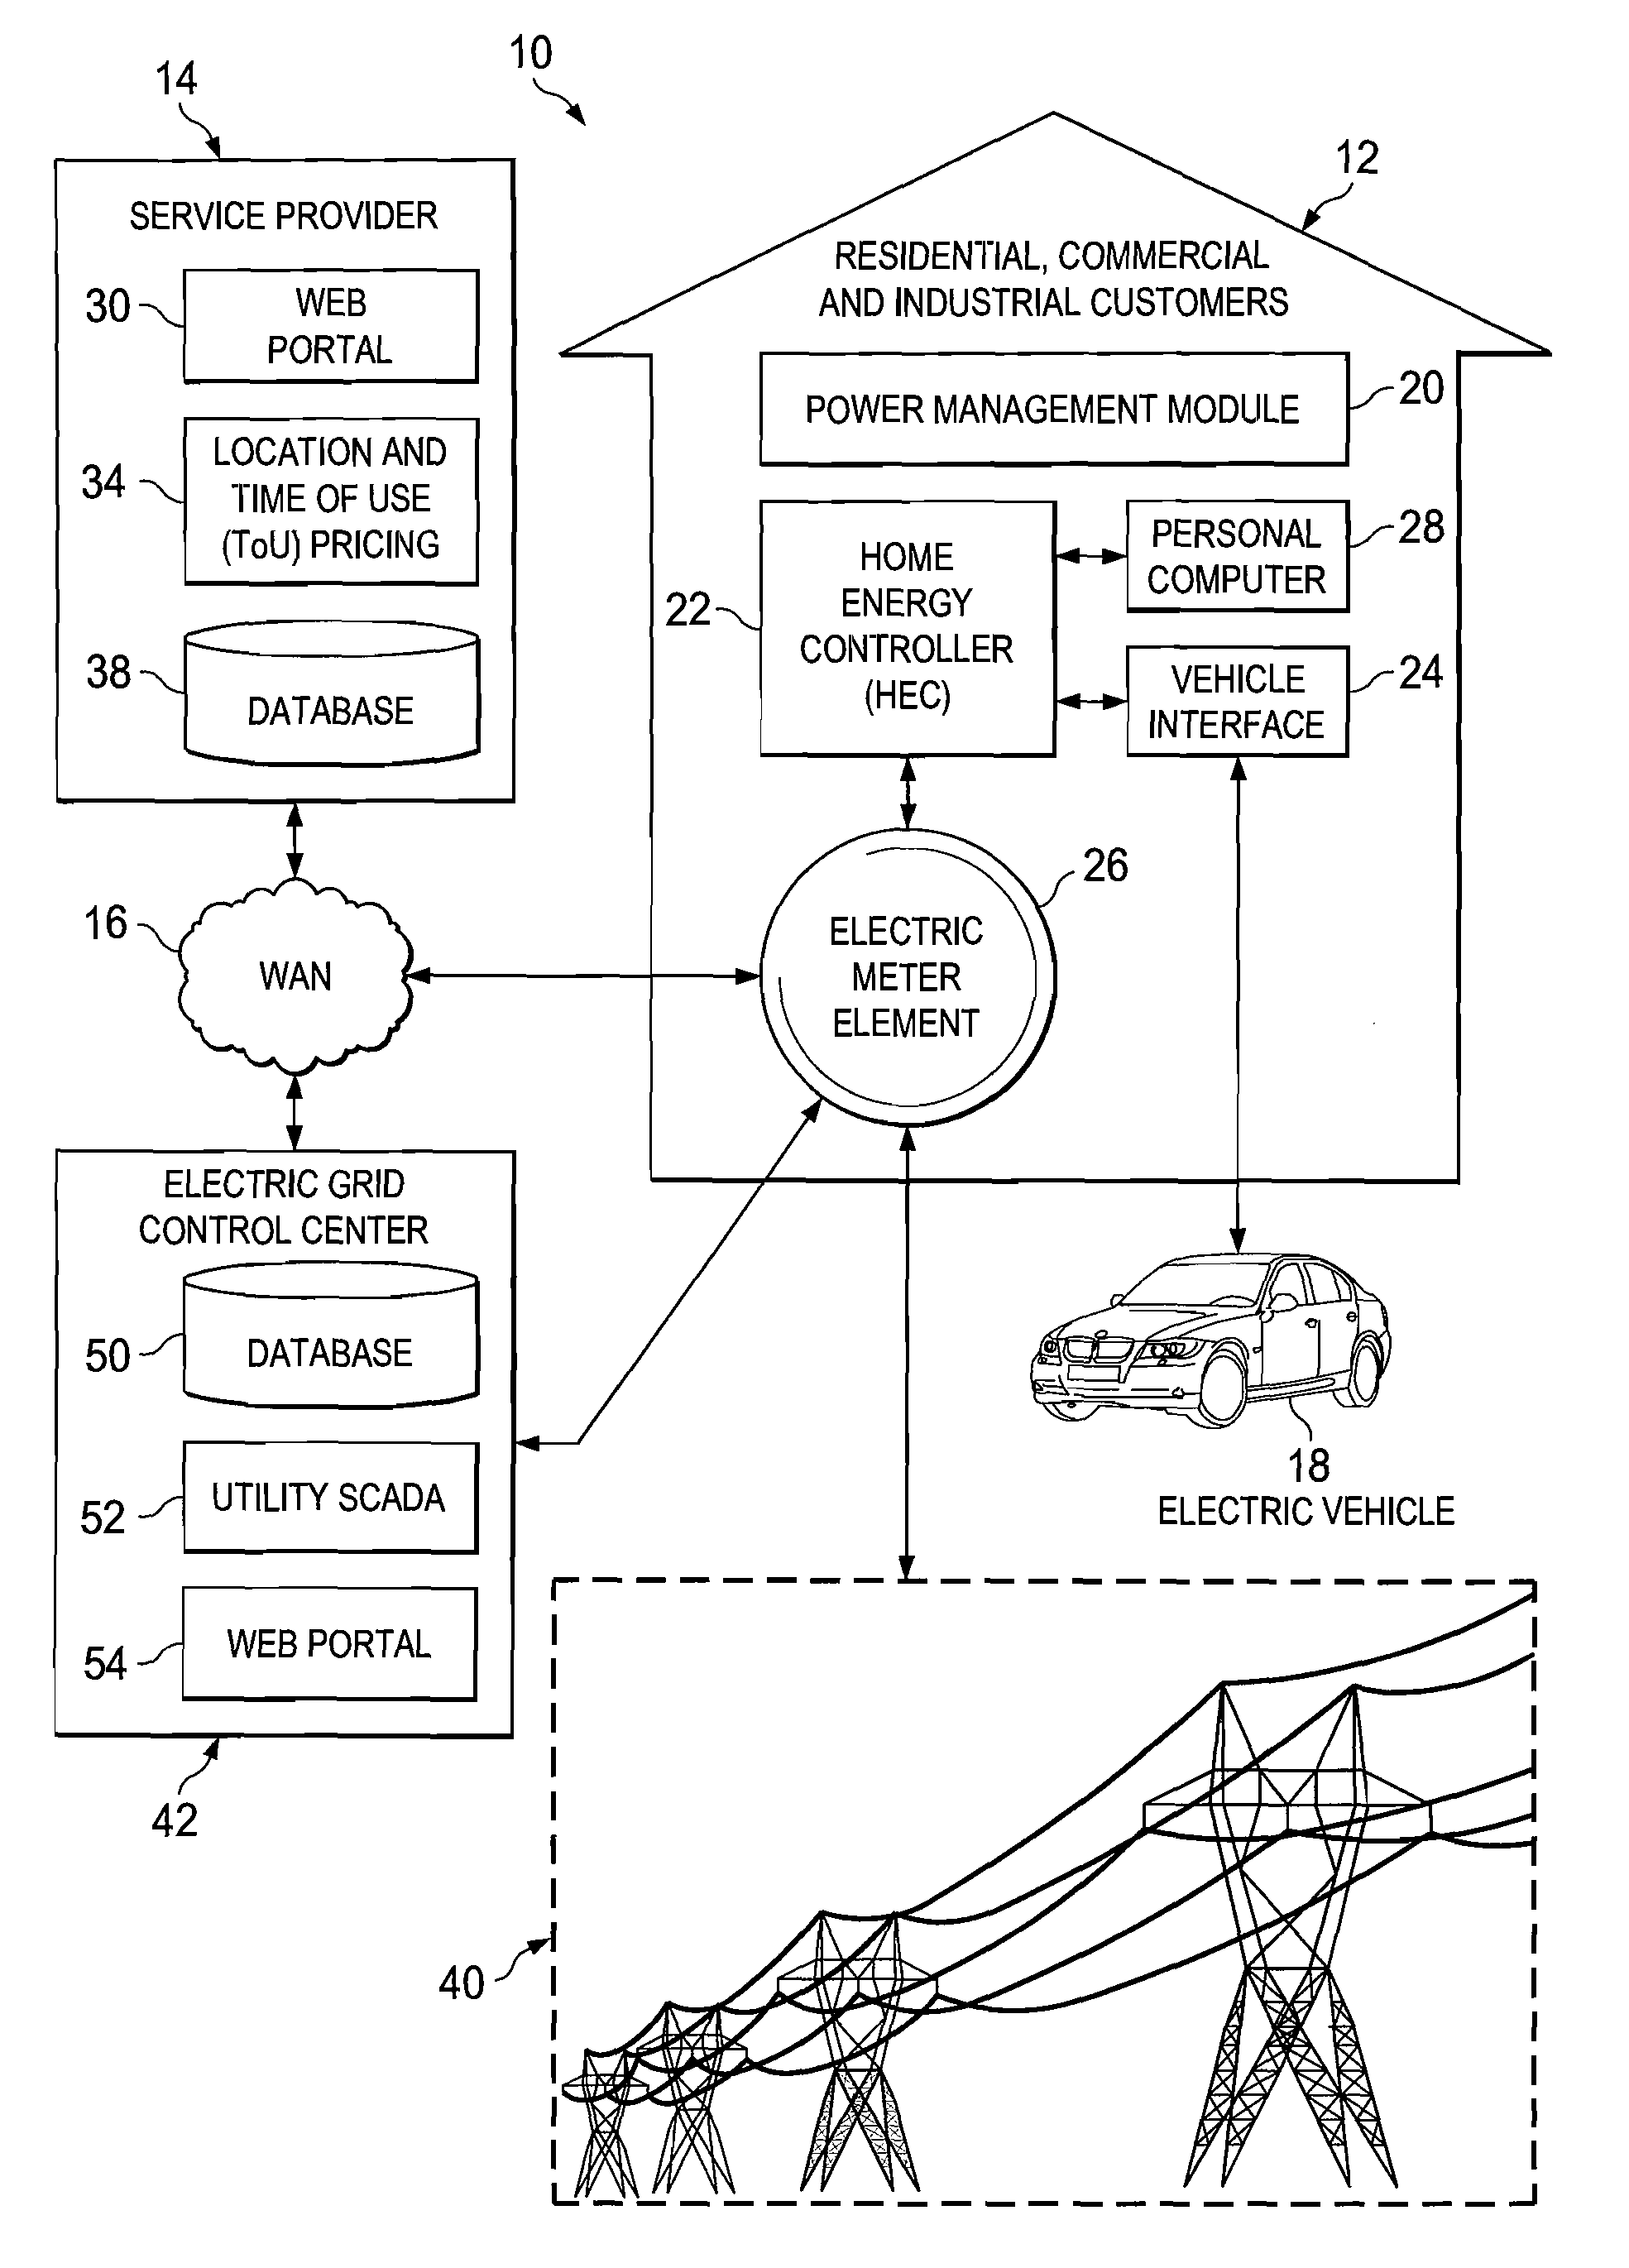 System and method for managing electric vehicle travel